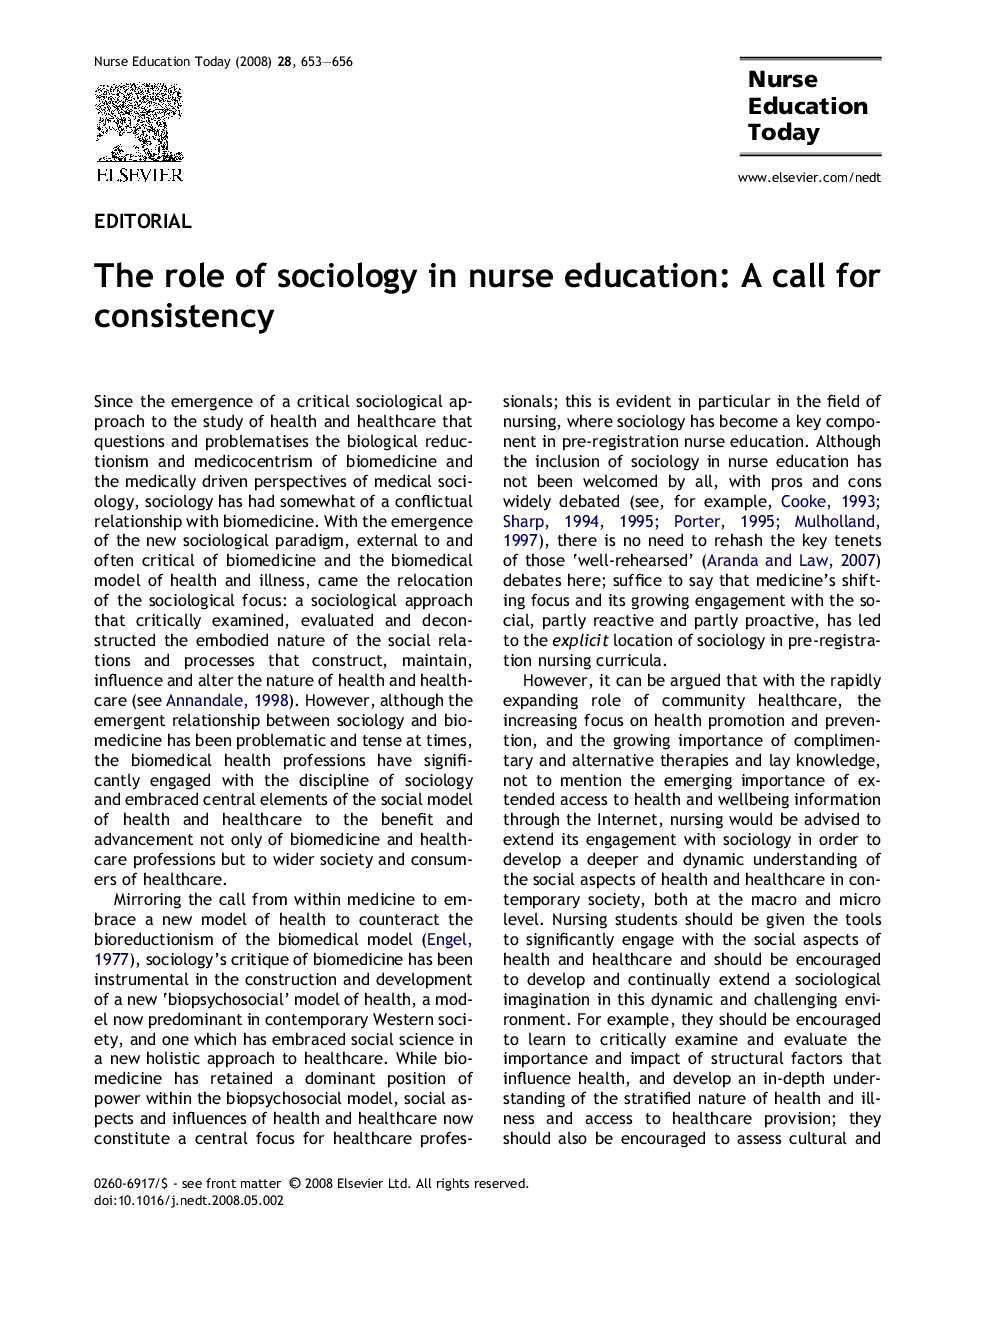 The role of sociology in nurse education: A call for consistency